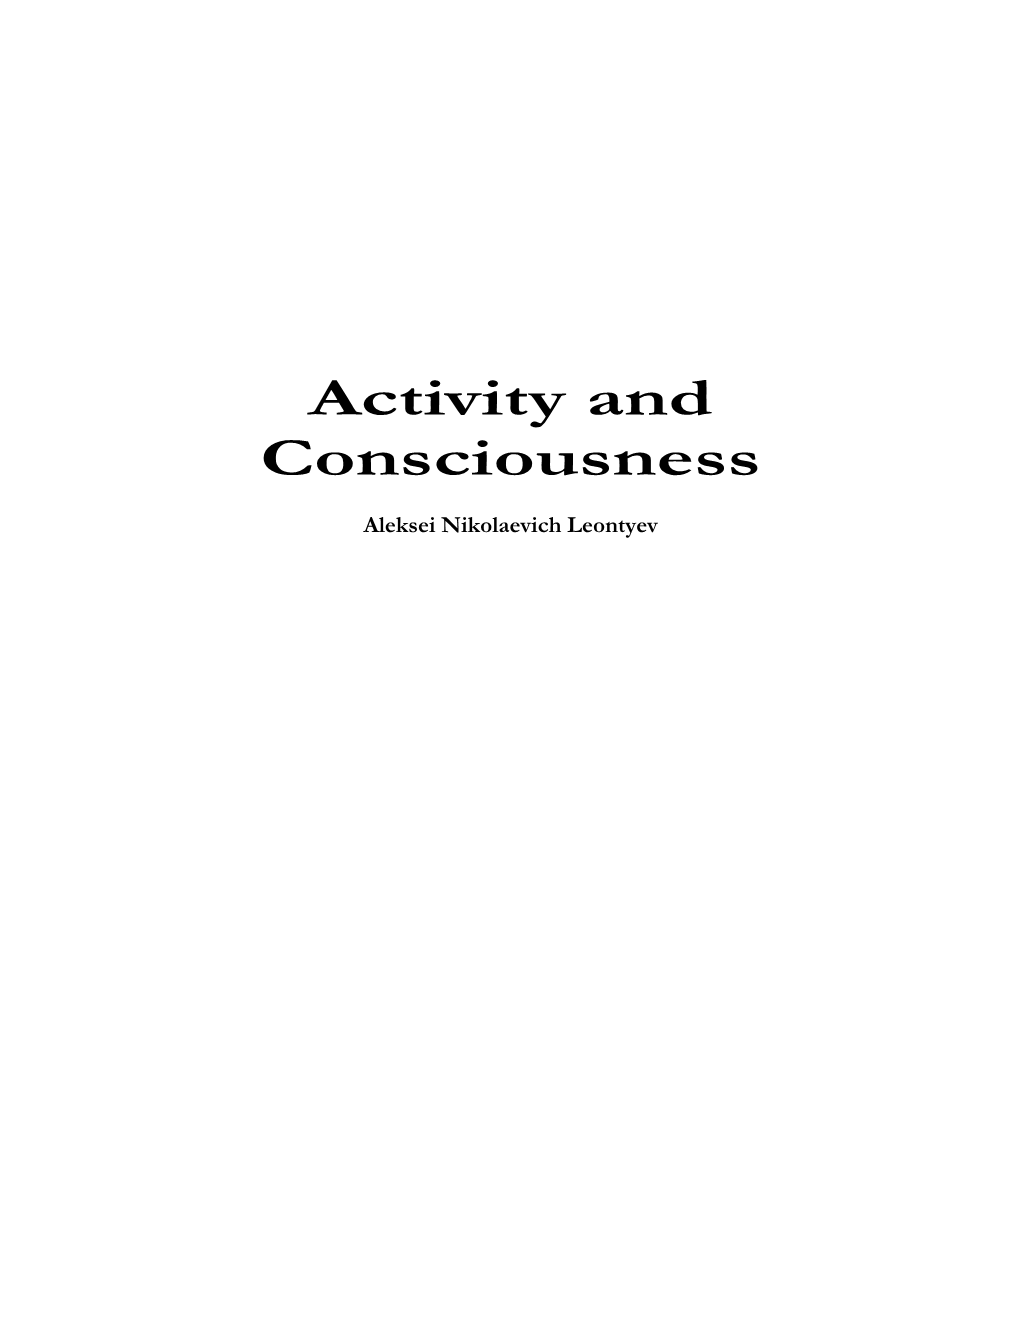 Activity, Consciousness and Personality 39